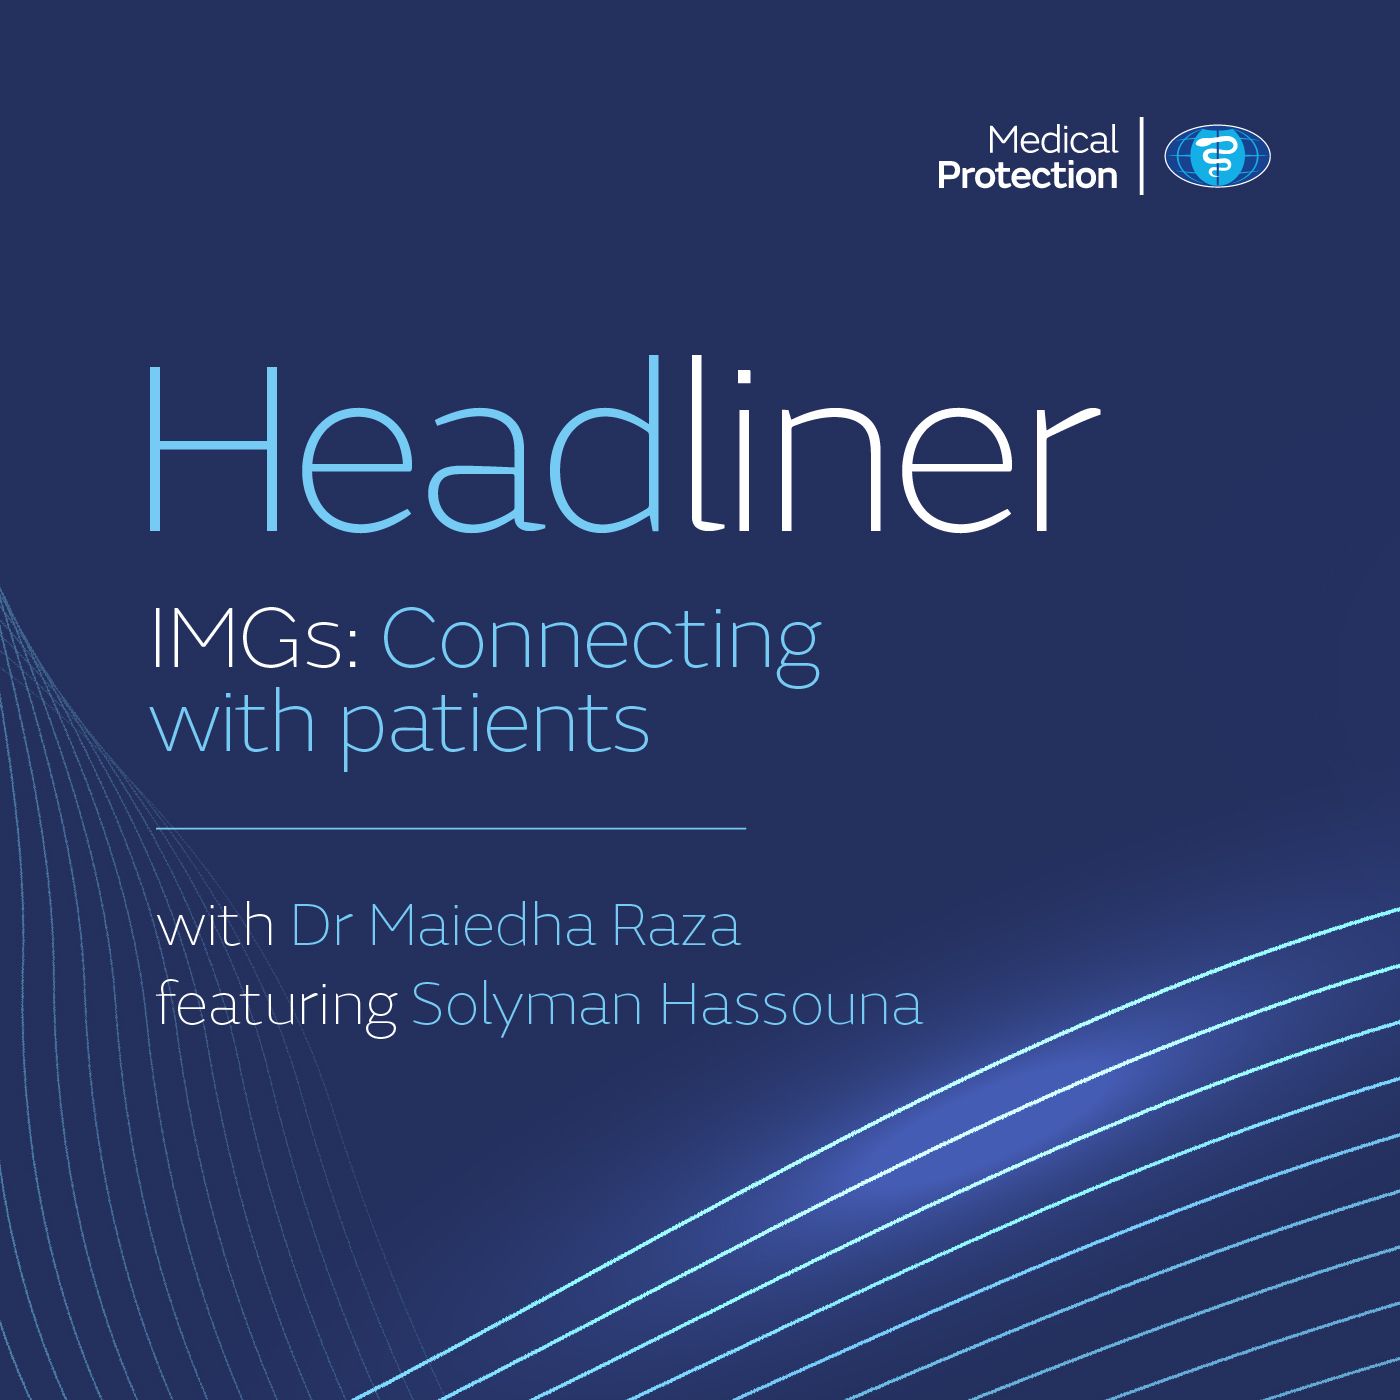 IMGs: Connecting with patients